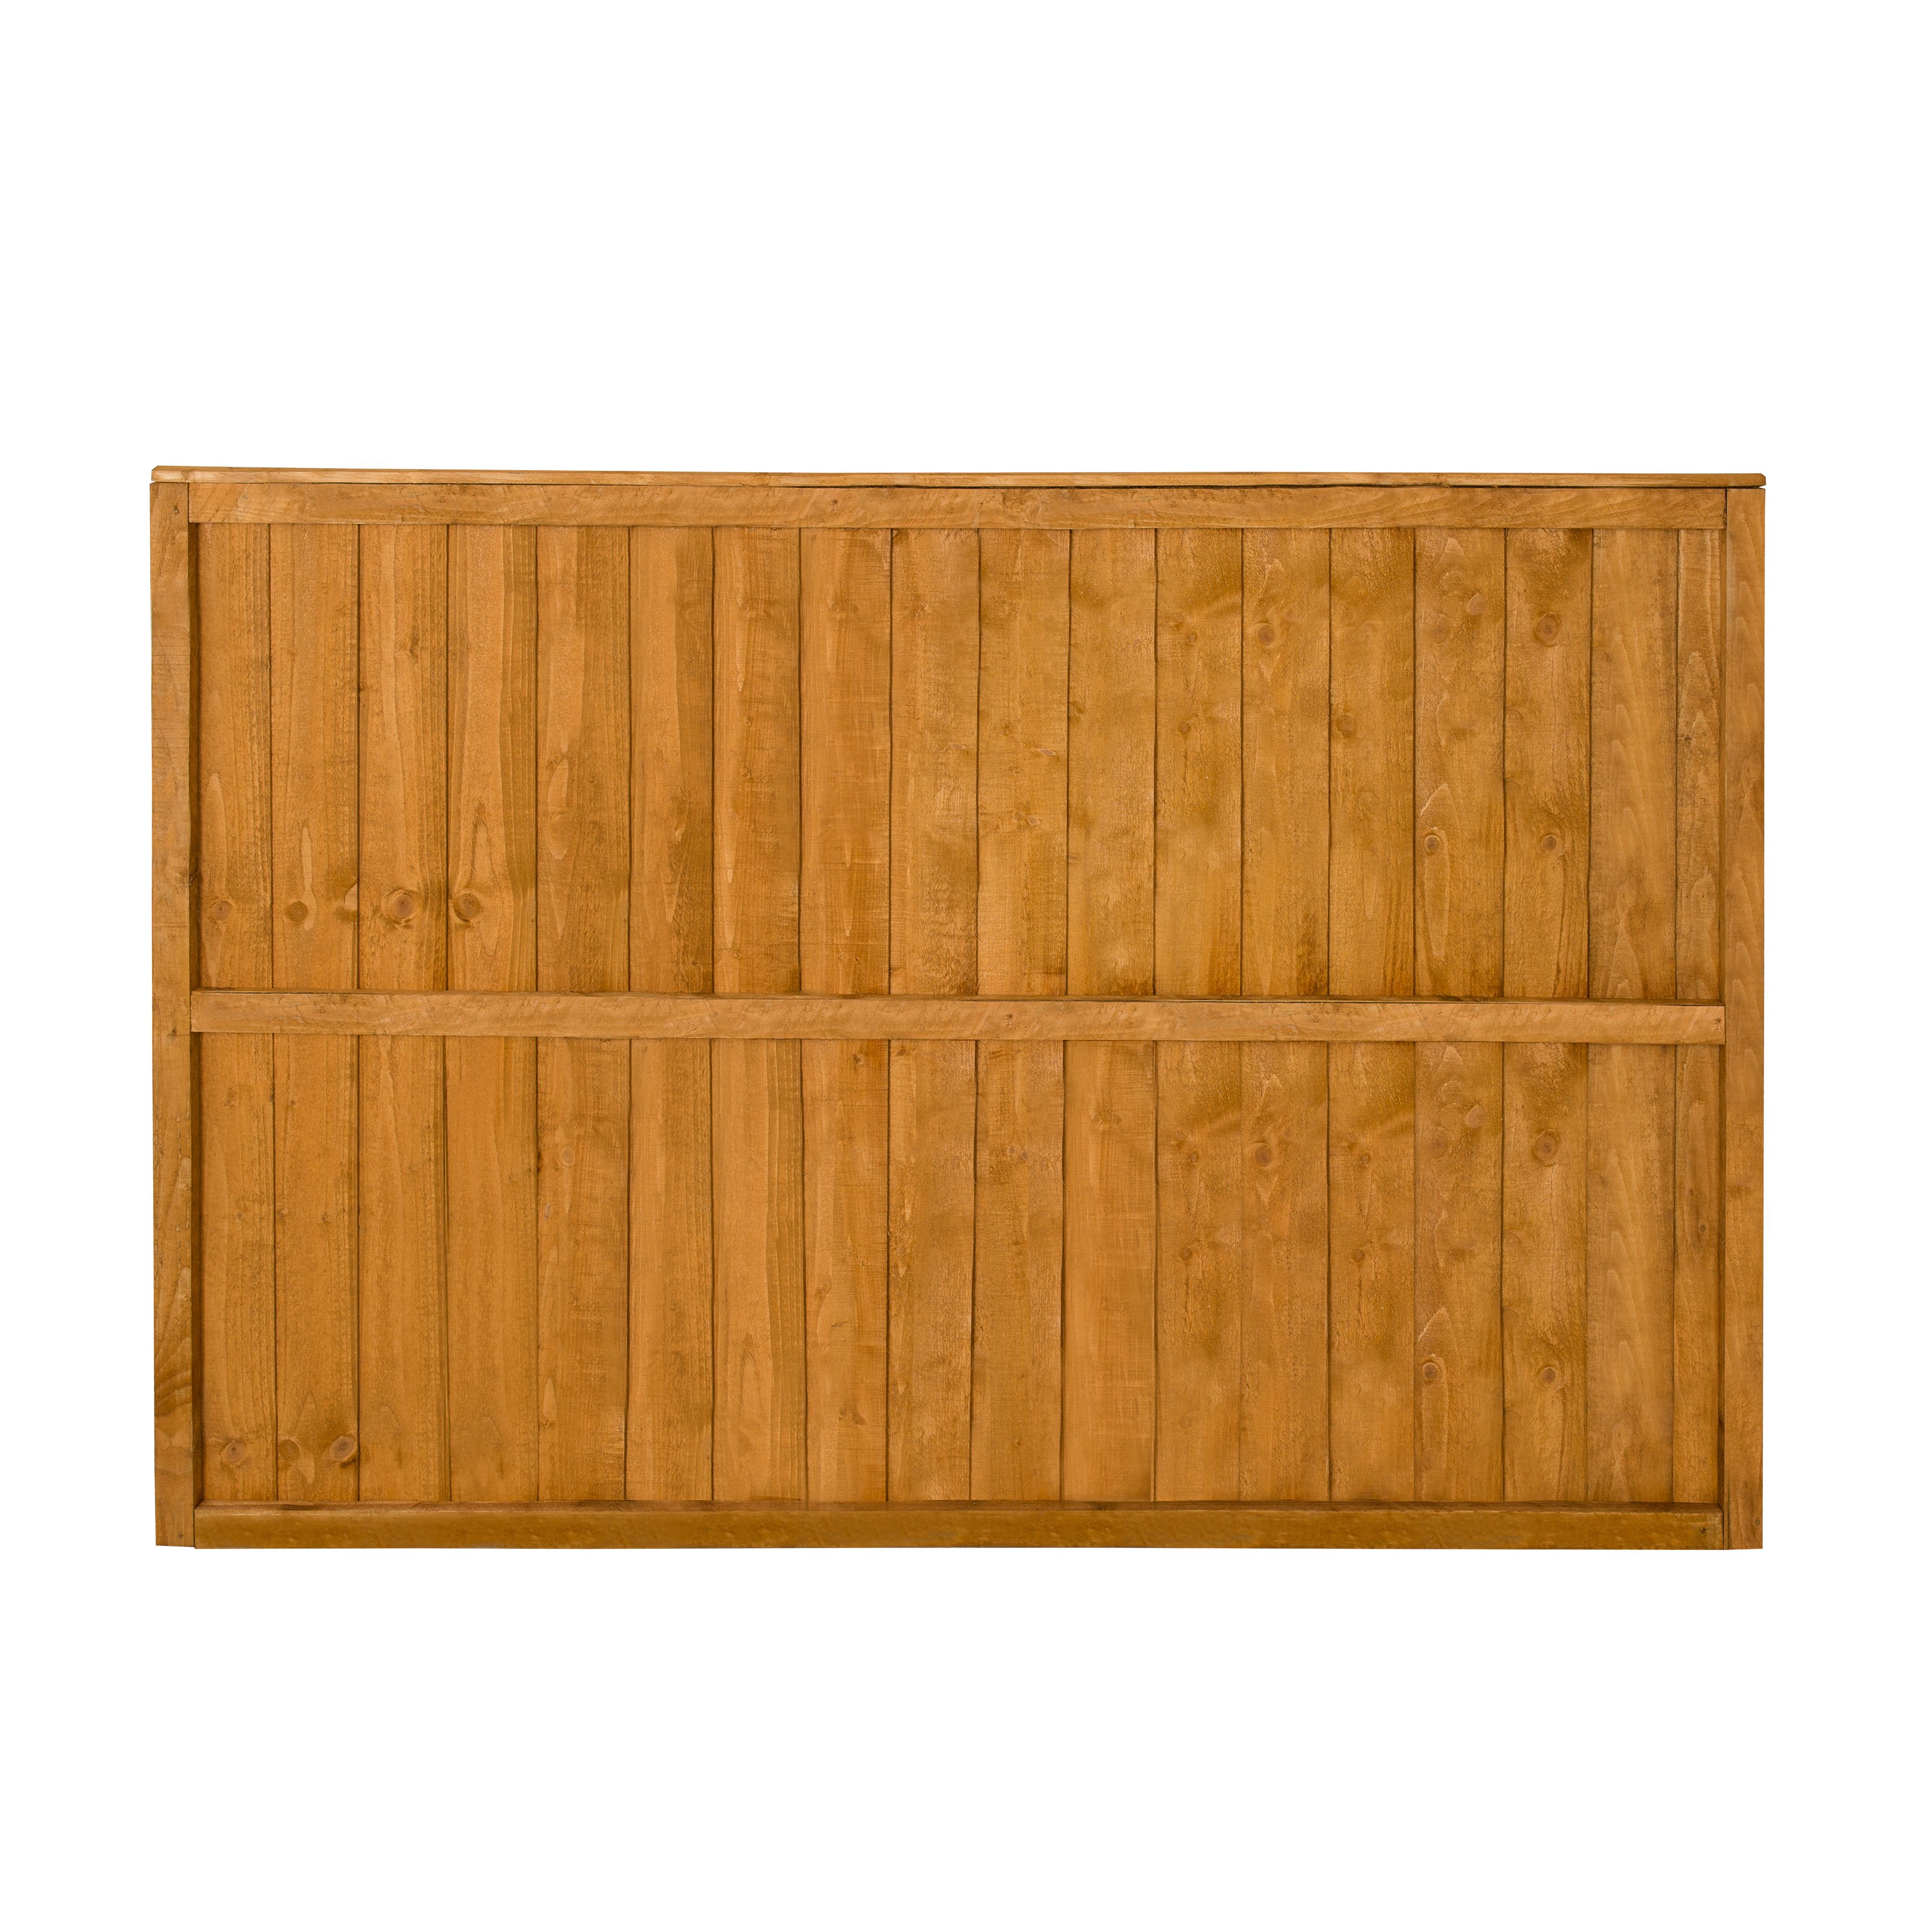 Forest Garden Dip treated 4ft Wooden Fence panel (W)1.83m (H)1.23m, Pack of 4